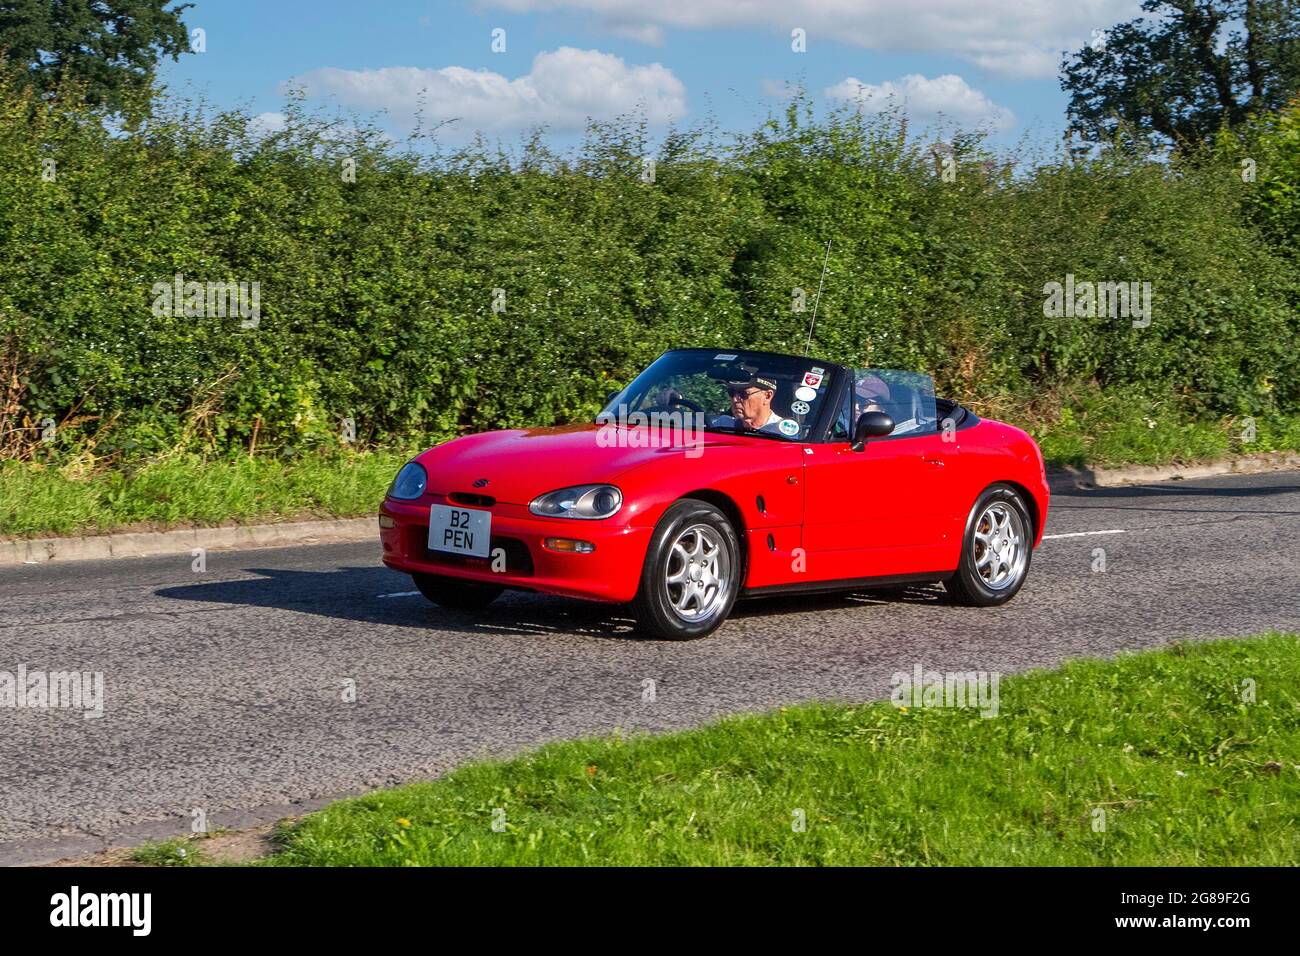 1995 90s red Suzuki Cappuccino 657cc sports kei cars, a vehicle en-route to Capesthorne Hall classic July car show, Cheshire, UK Stock Photo